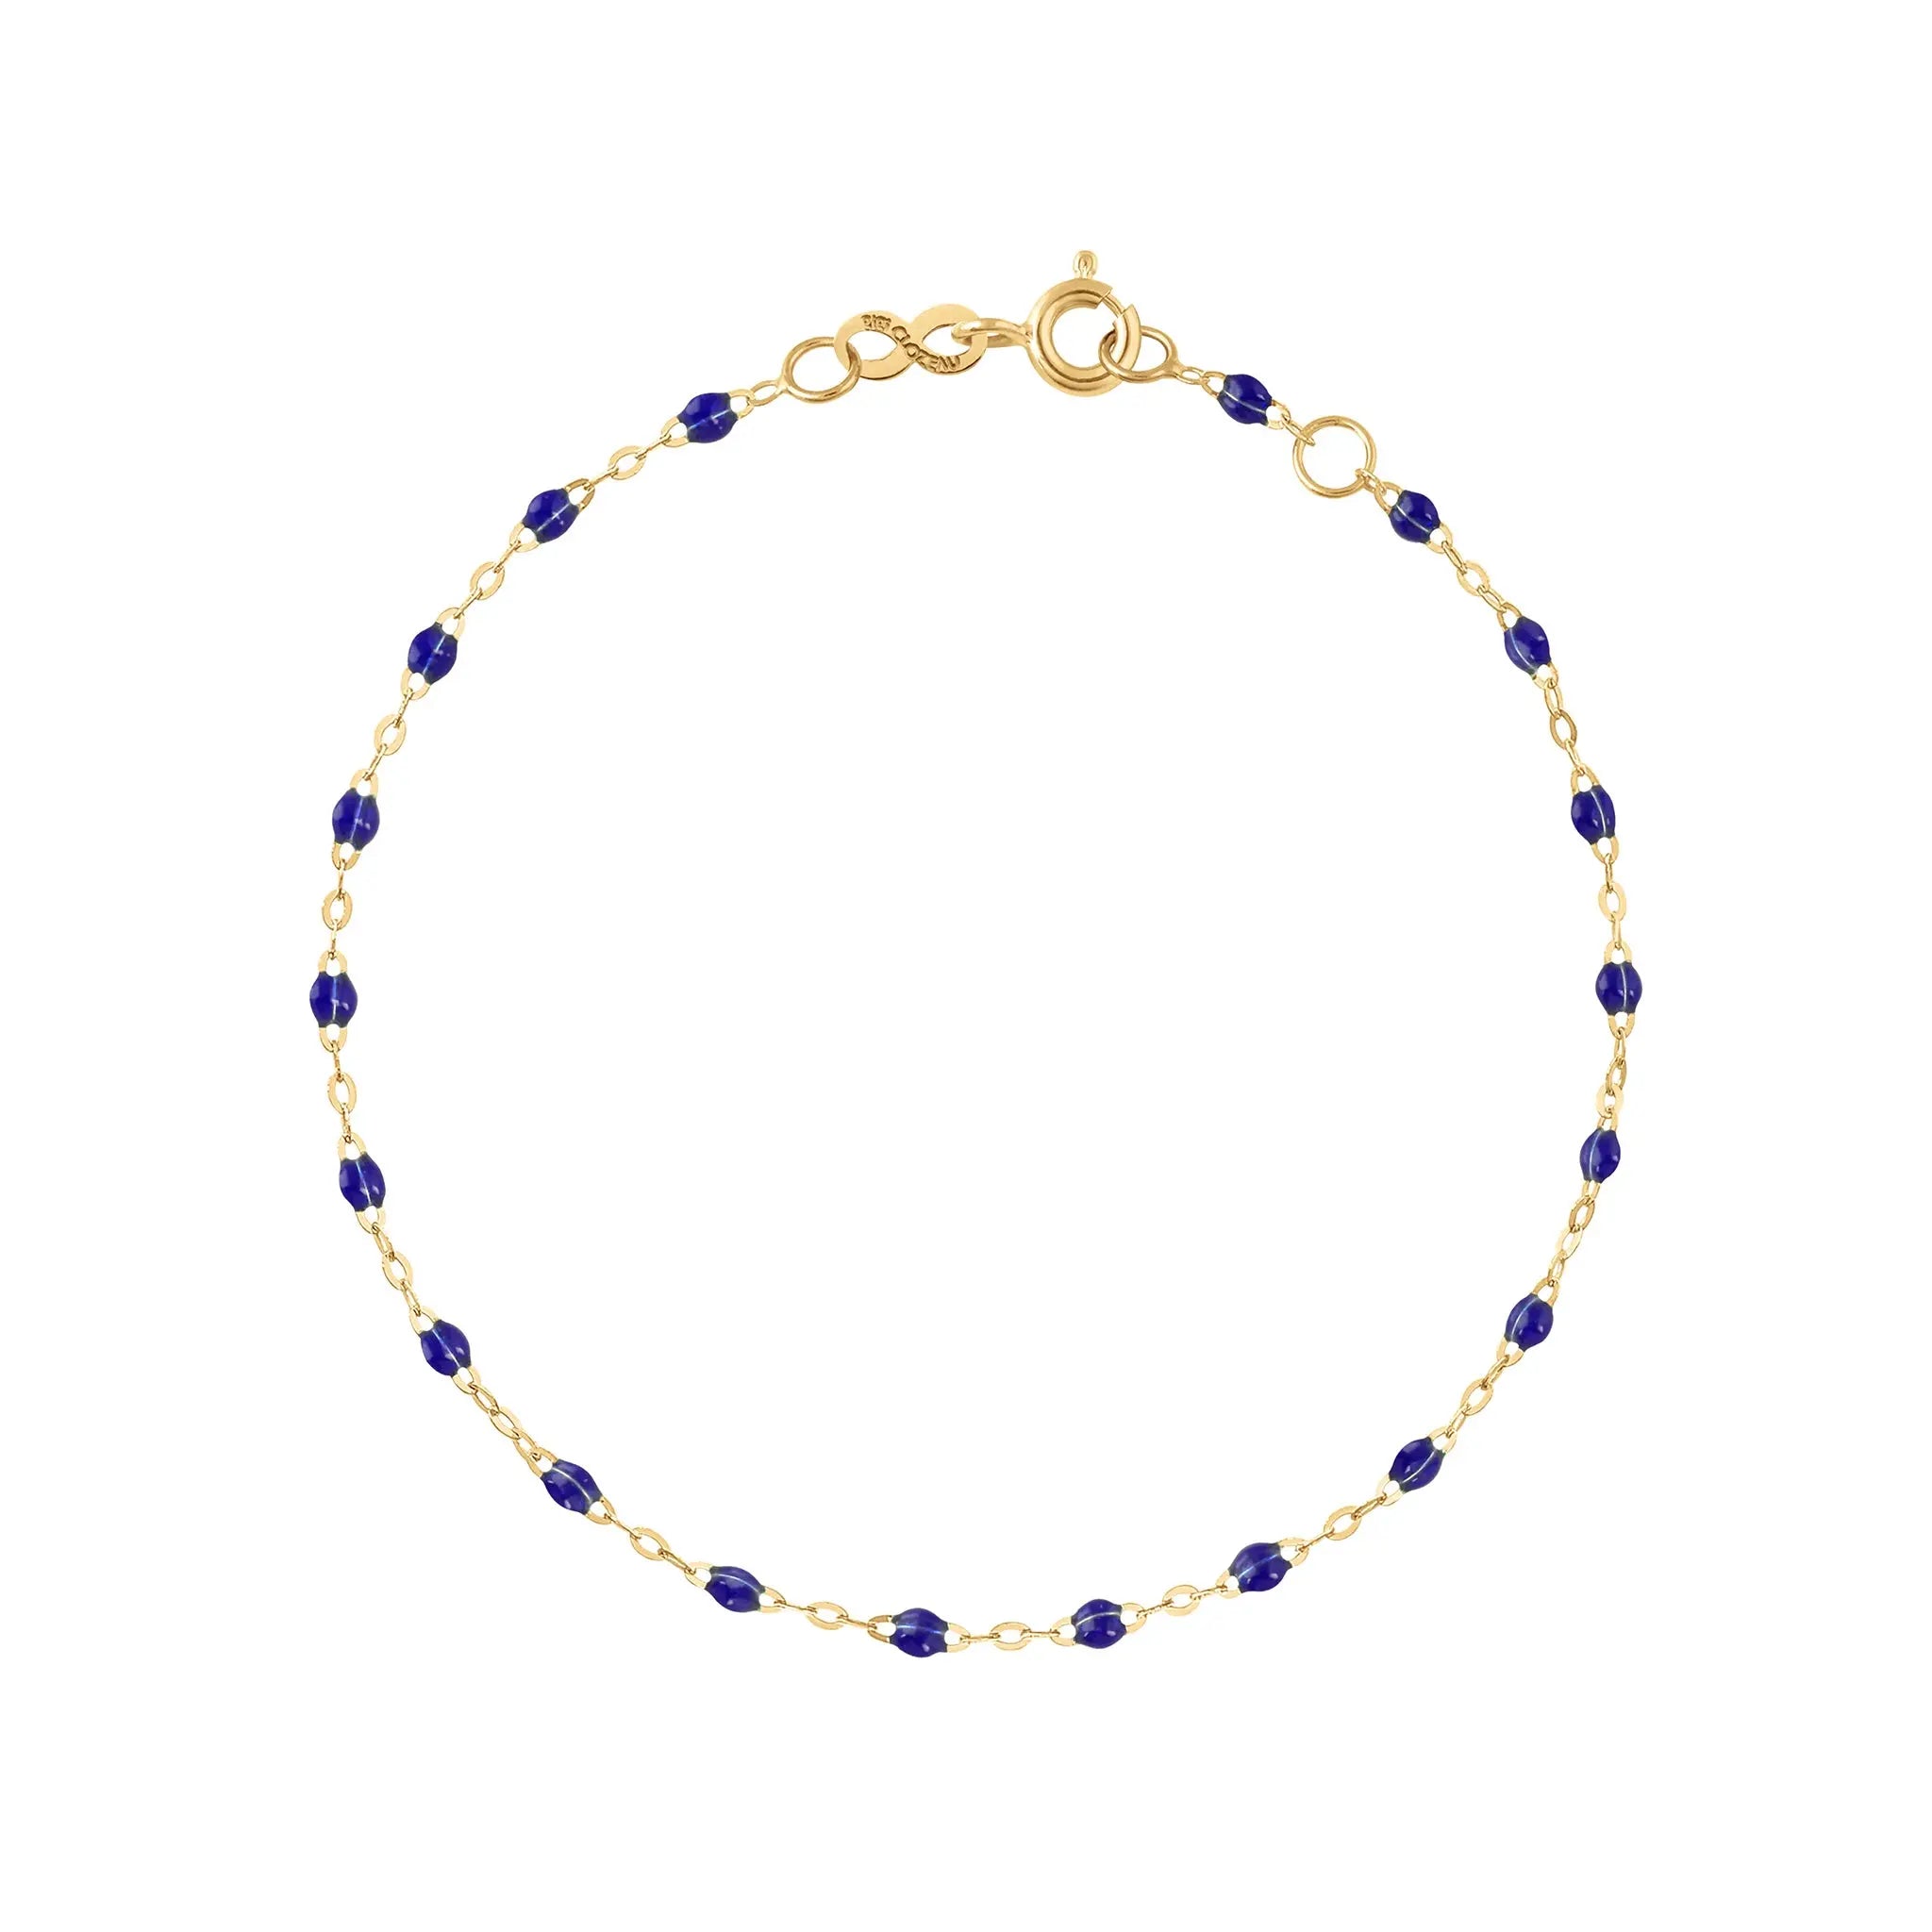 The Classic Gigi bracelet by gigi CLOZEAU features 18K Yellow Gold, and unique Lapis jewels for a simple, everyday look.   Each jewel is unique, artisanally made in their family-owned workshop. 18K yellow gold and resin. The bracelet measures 6.7 inches with adjustable clasp at 6.3 inches.